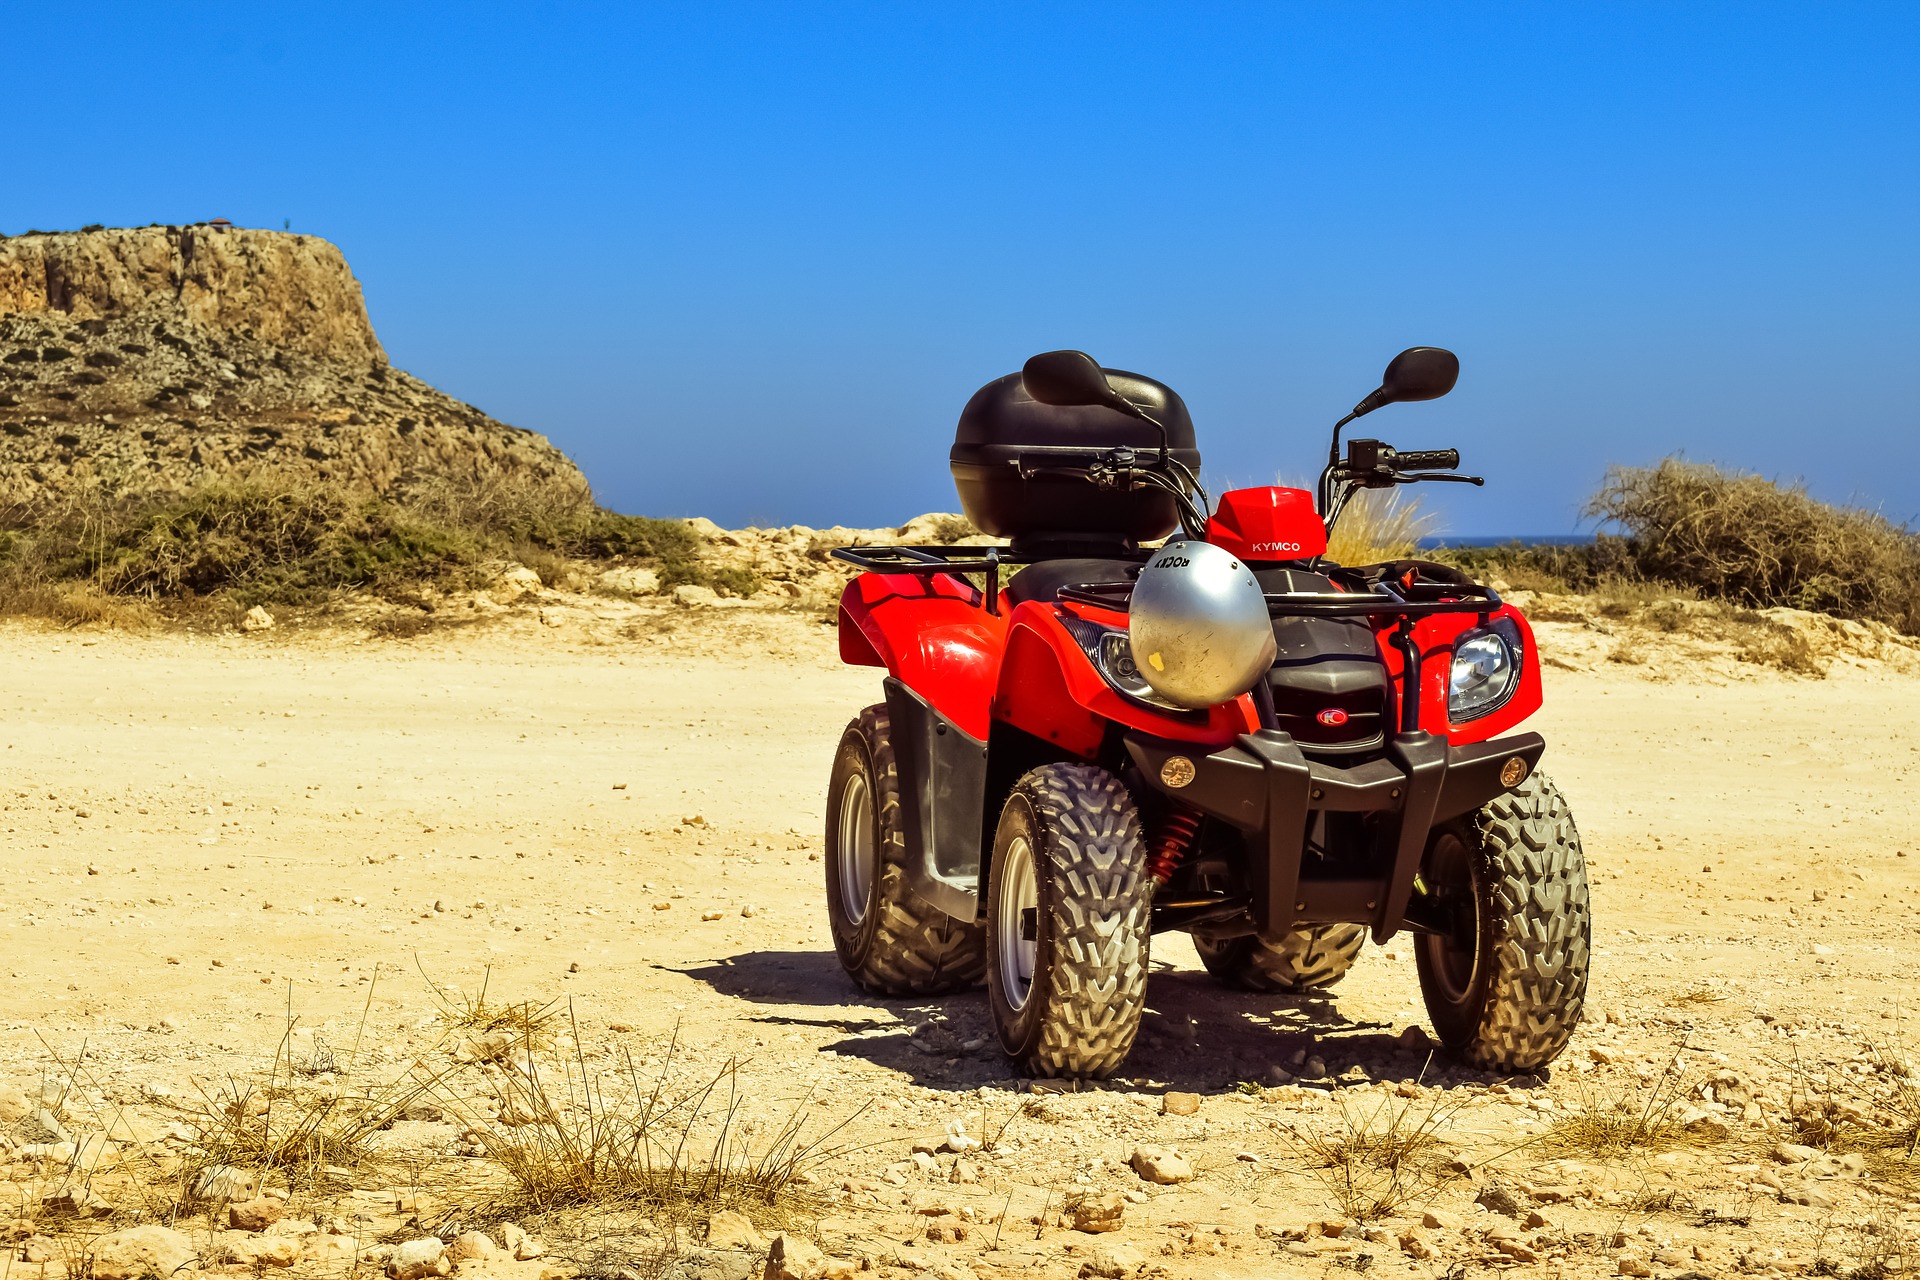 Atv Background Images, HD Pictures and Wallpaper For Free Download | Pngtree